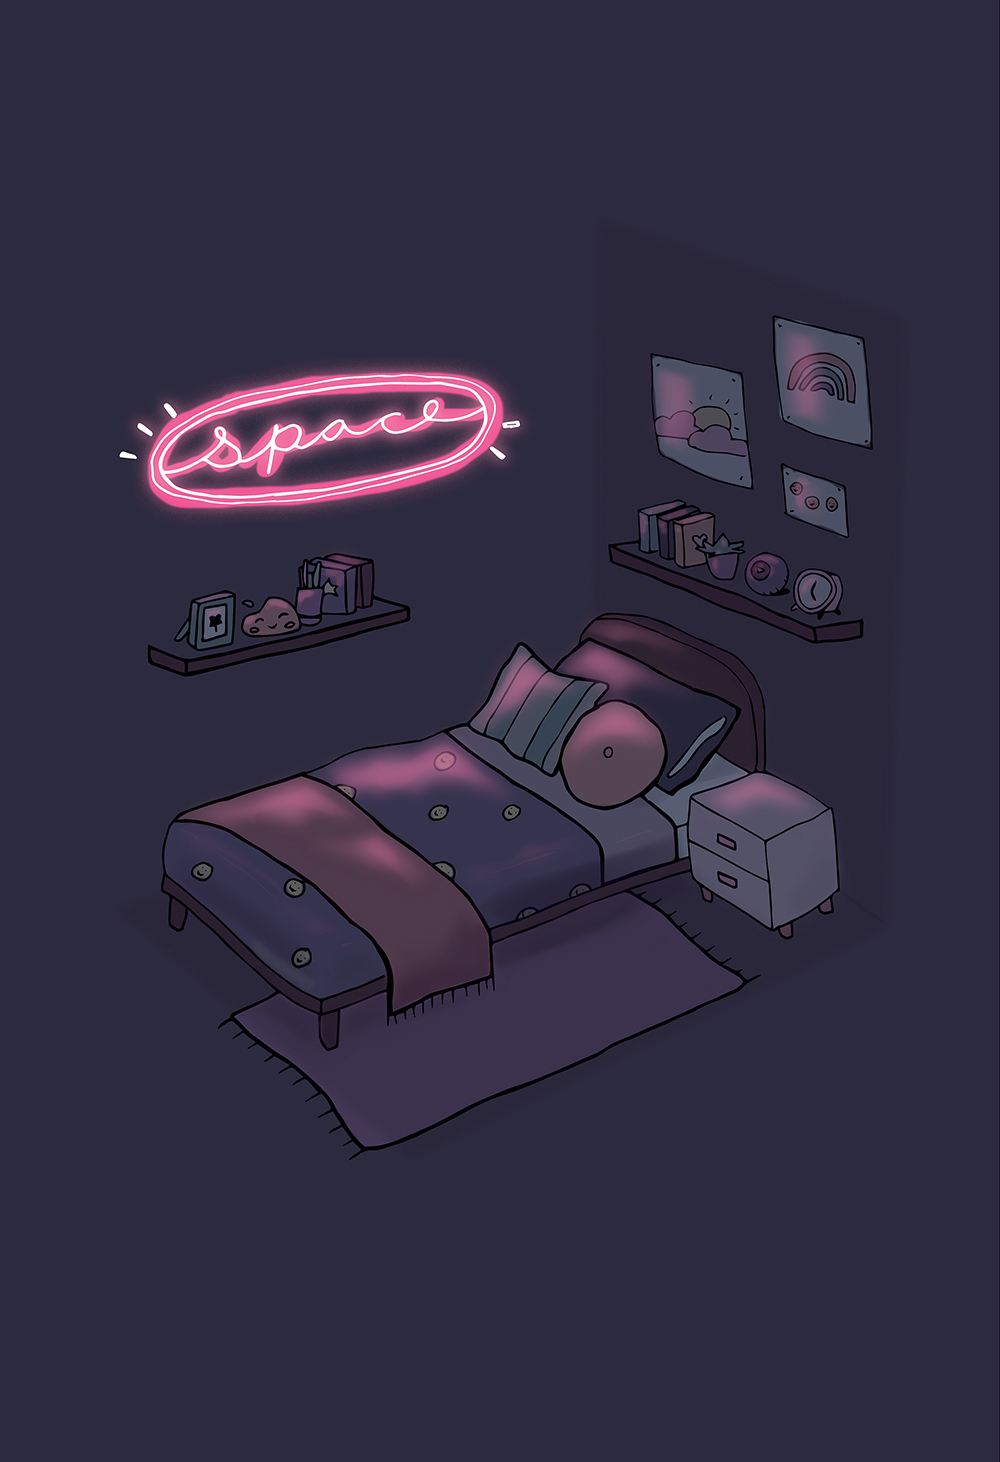 A vector illustration of a bedroom at night. There is a pink neon sign with the word, Space, that illuminates the bed, shelves, and posters.